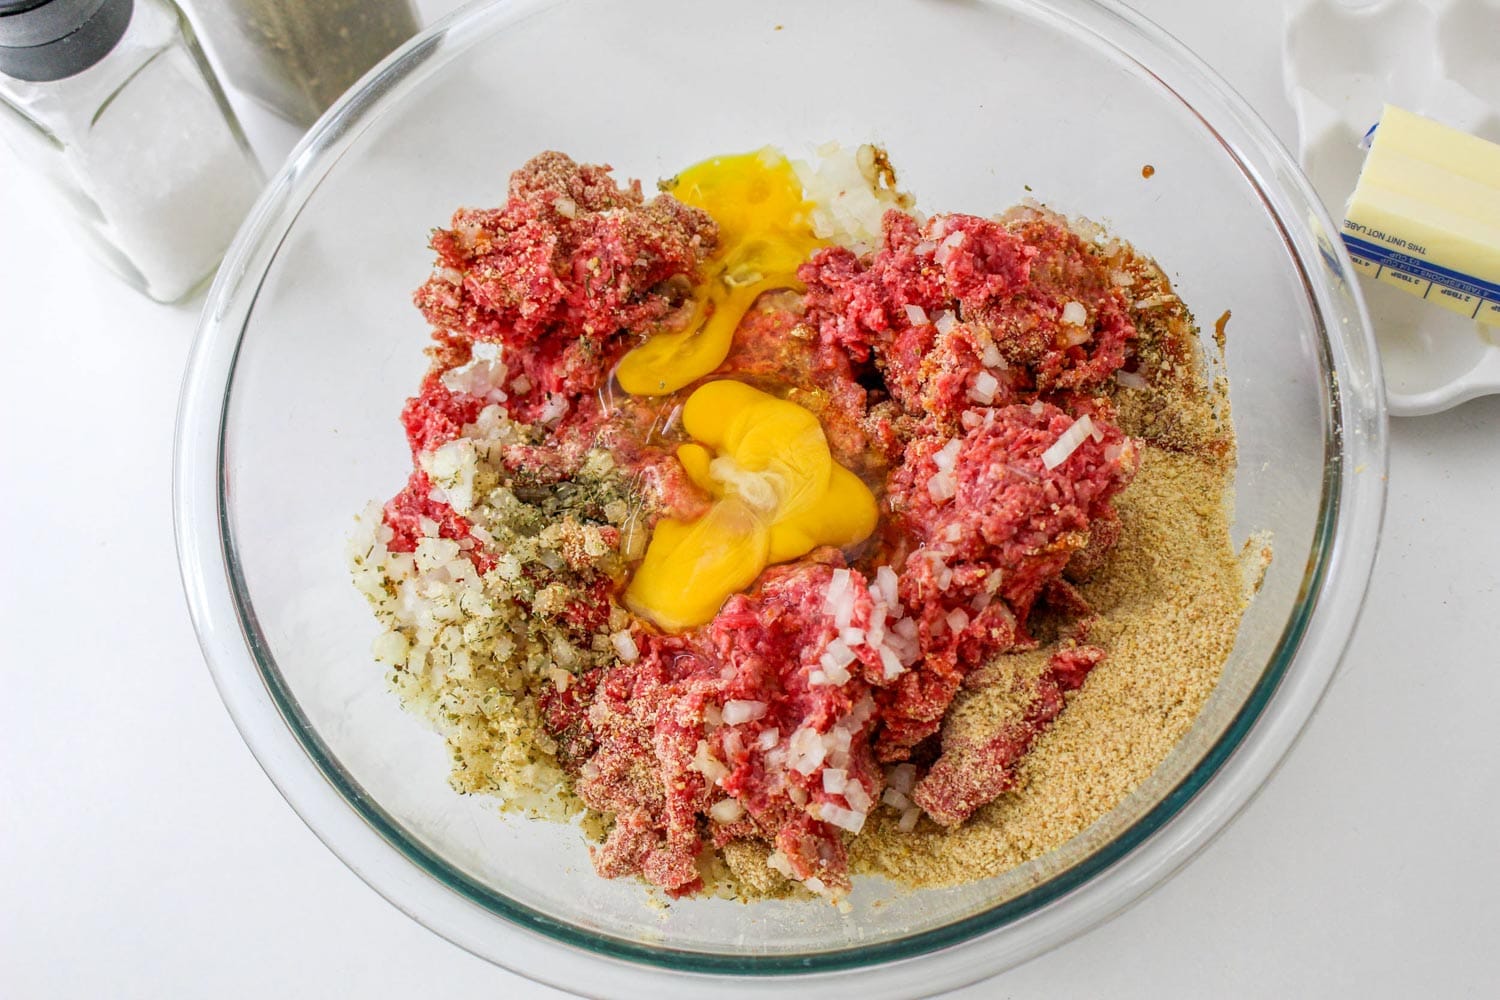 Meatloaf ingredients in a bowl before mixing